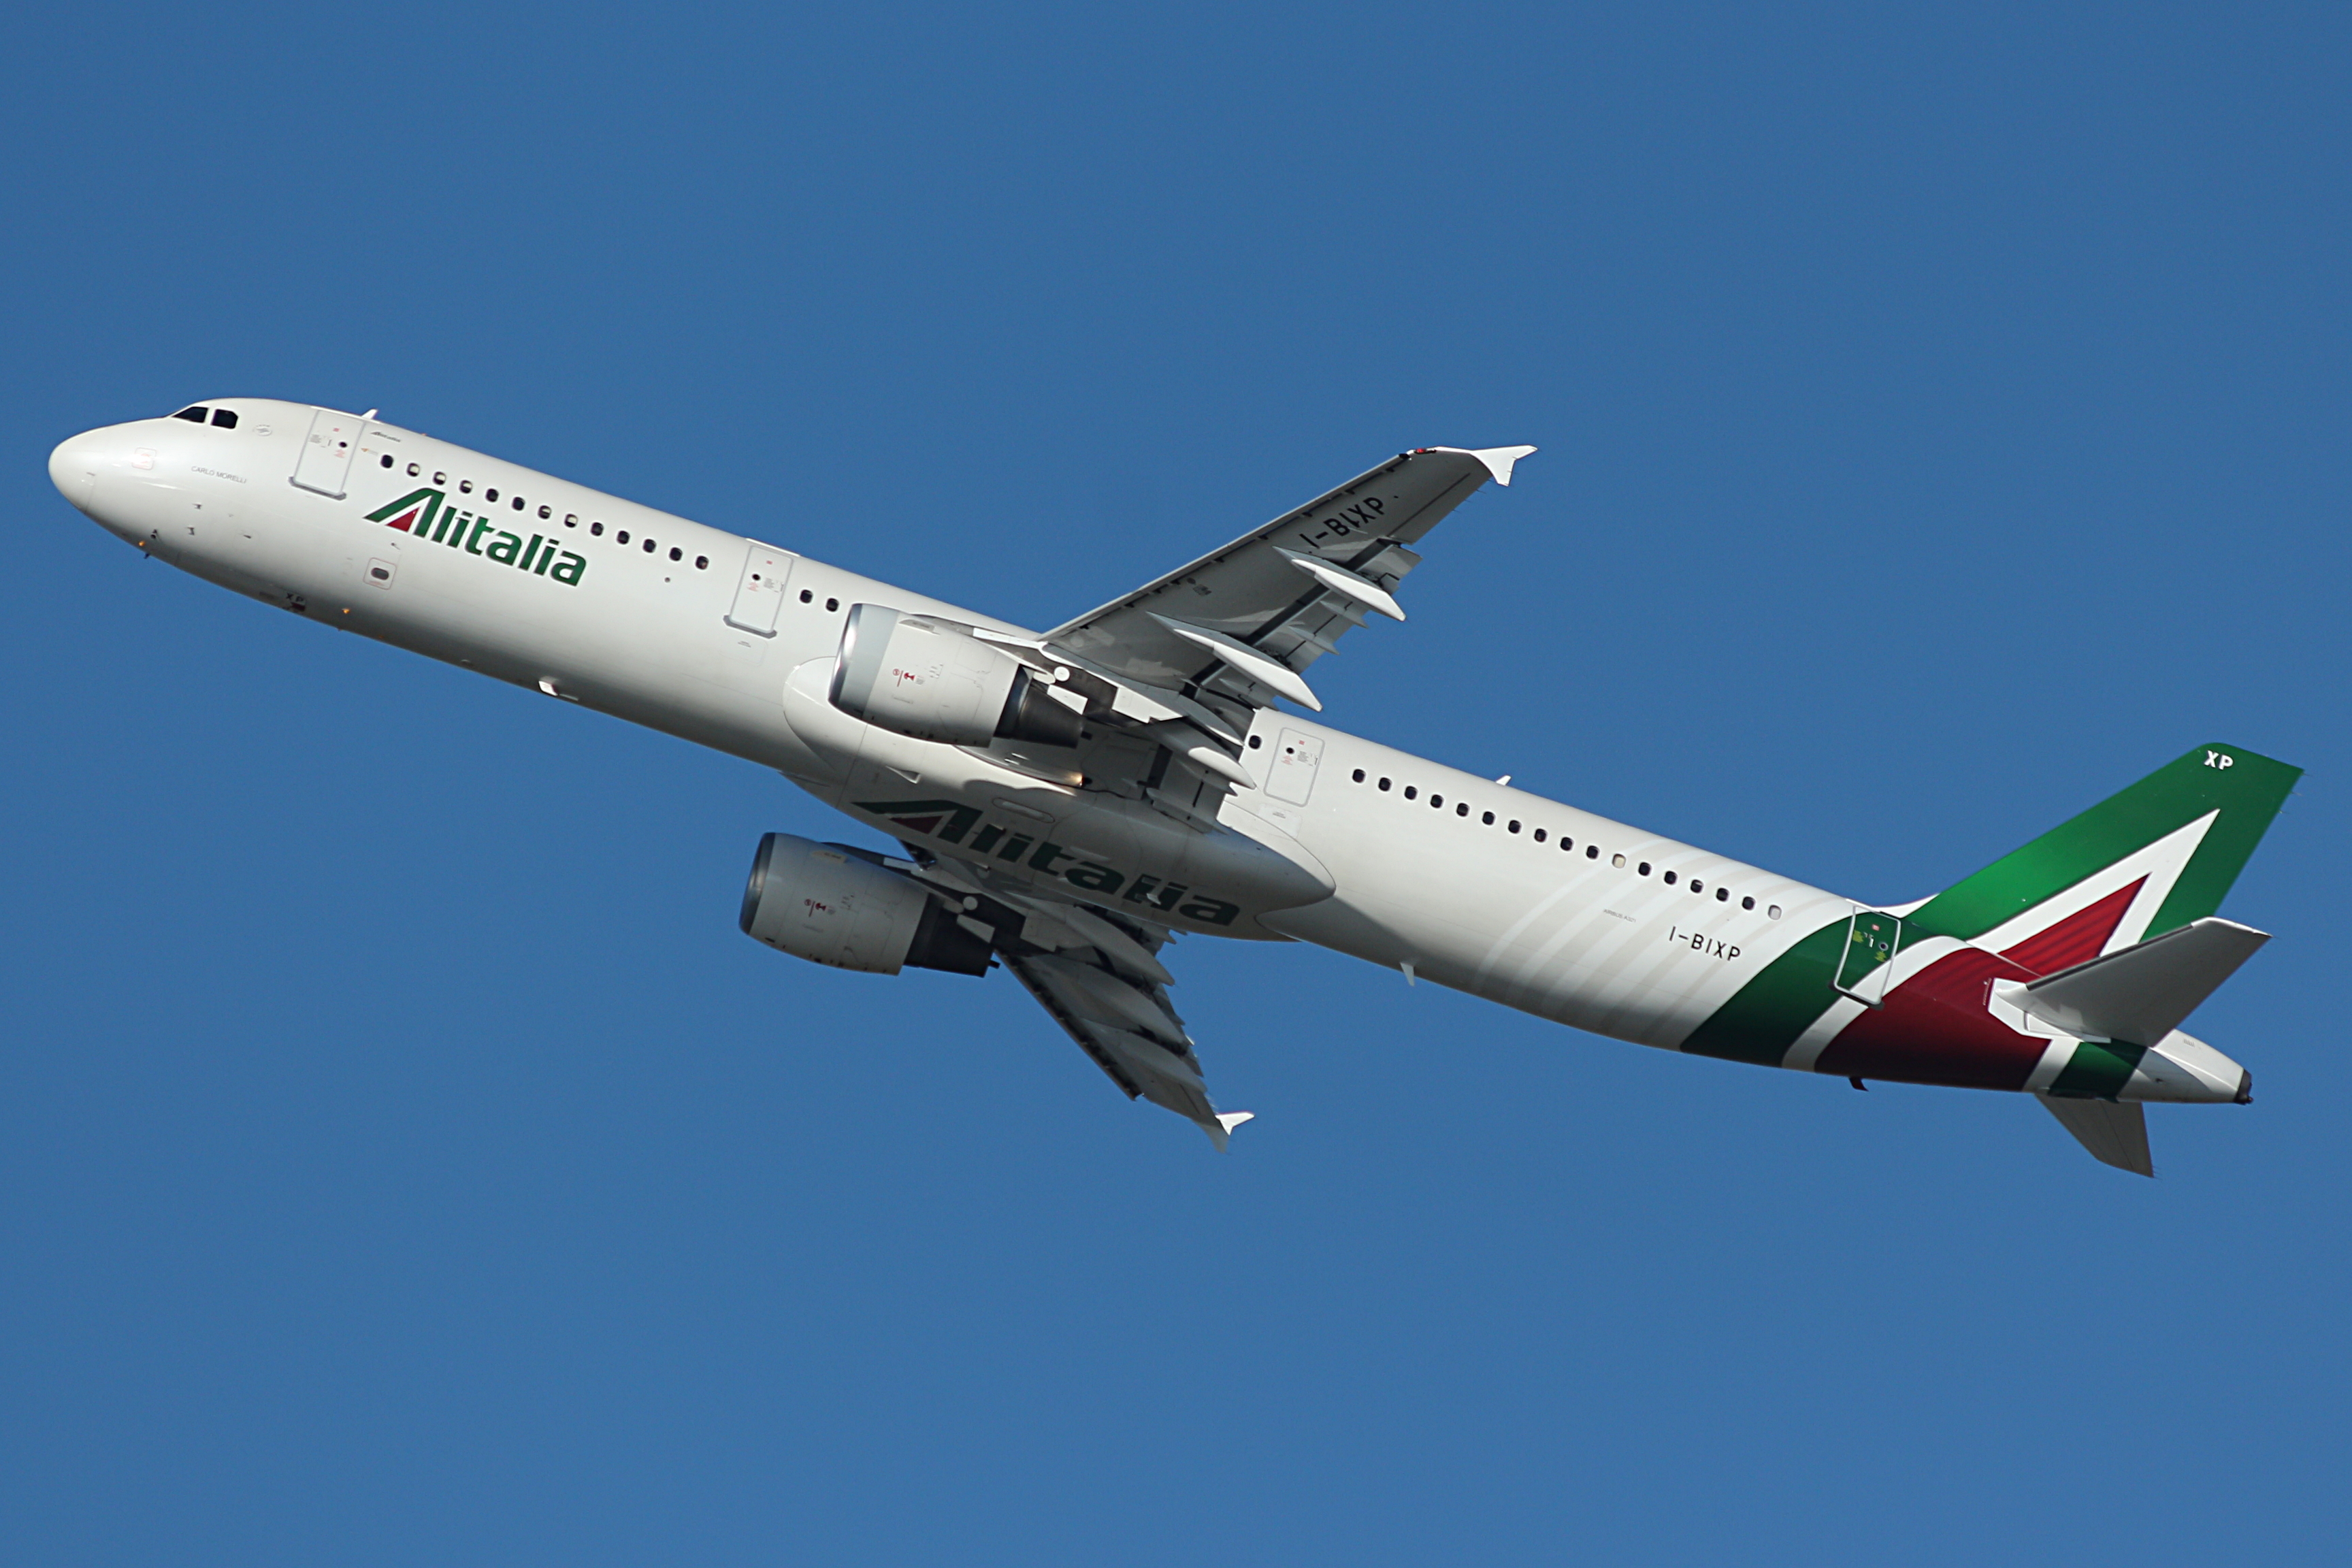 Alitalia was the least punctual airline on 5th of October